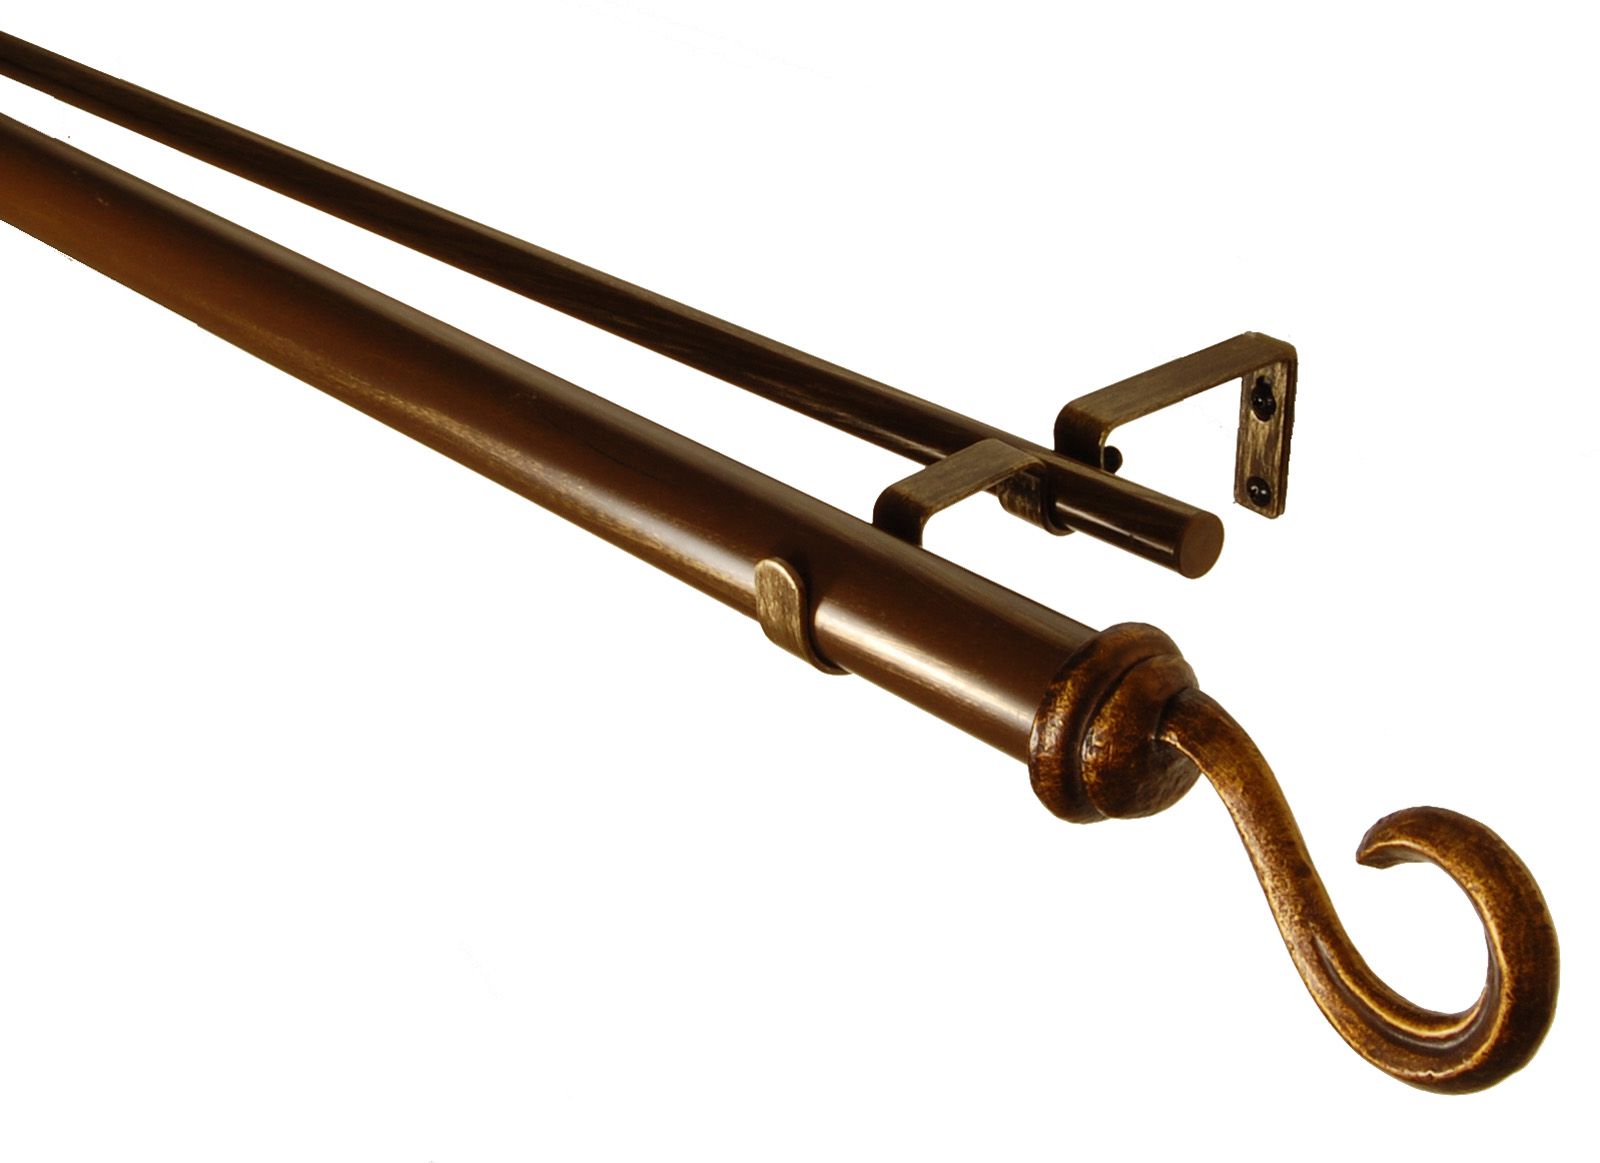 BCL Hook Double Curtain Rod, Antique Gold Finish, 48-inch to 86-inch, 1.25-inch Diameter Pole